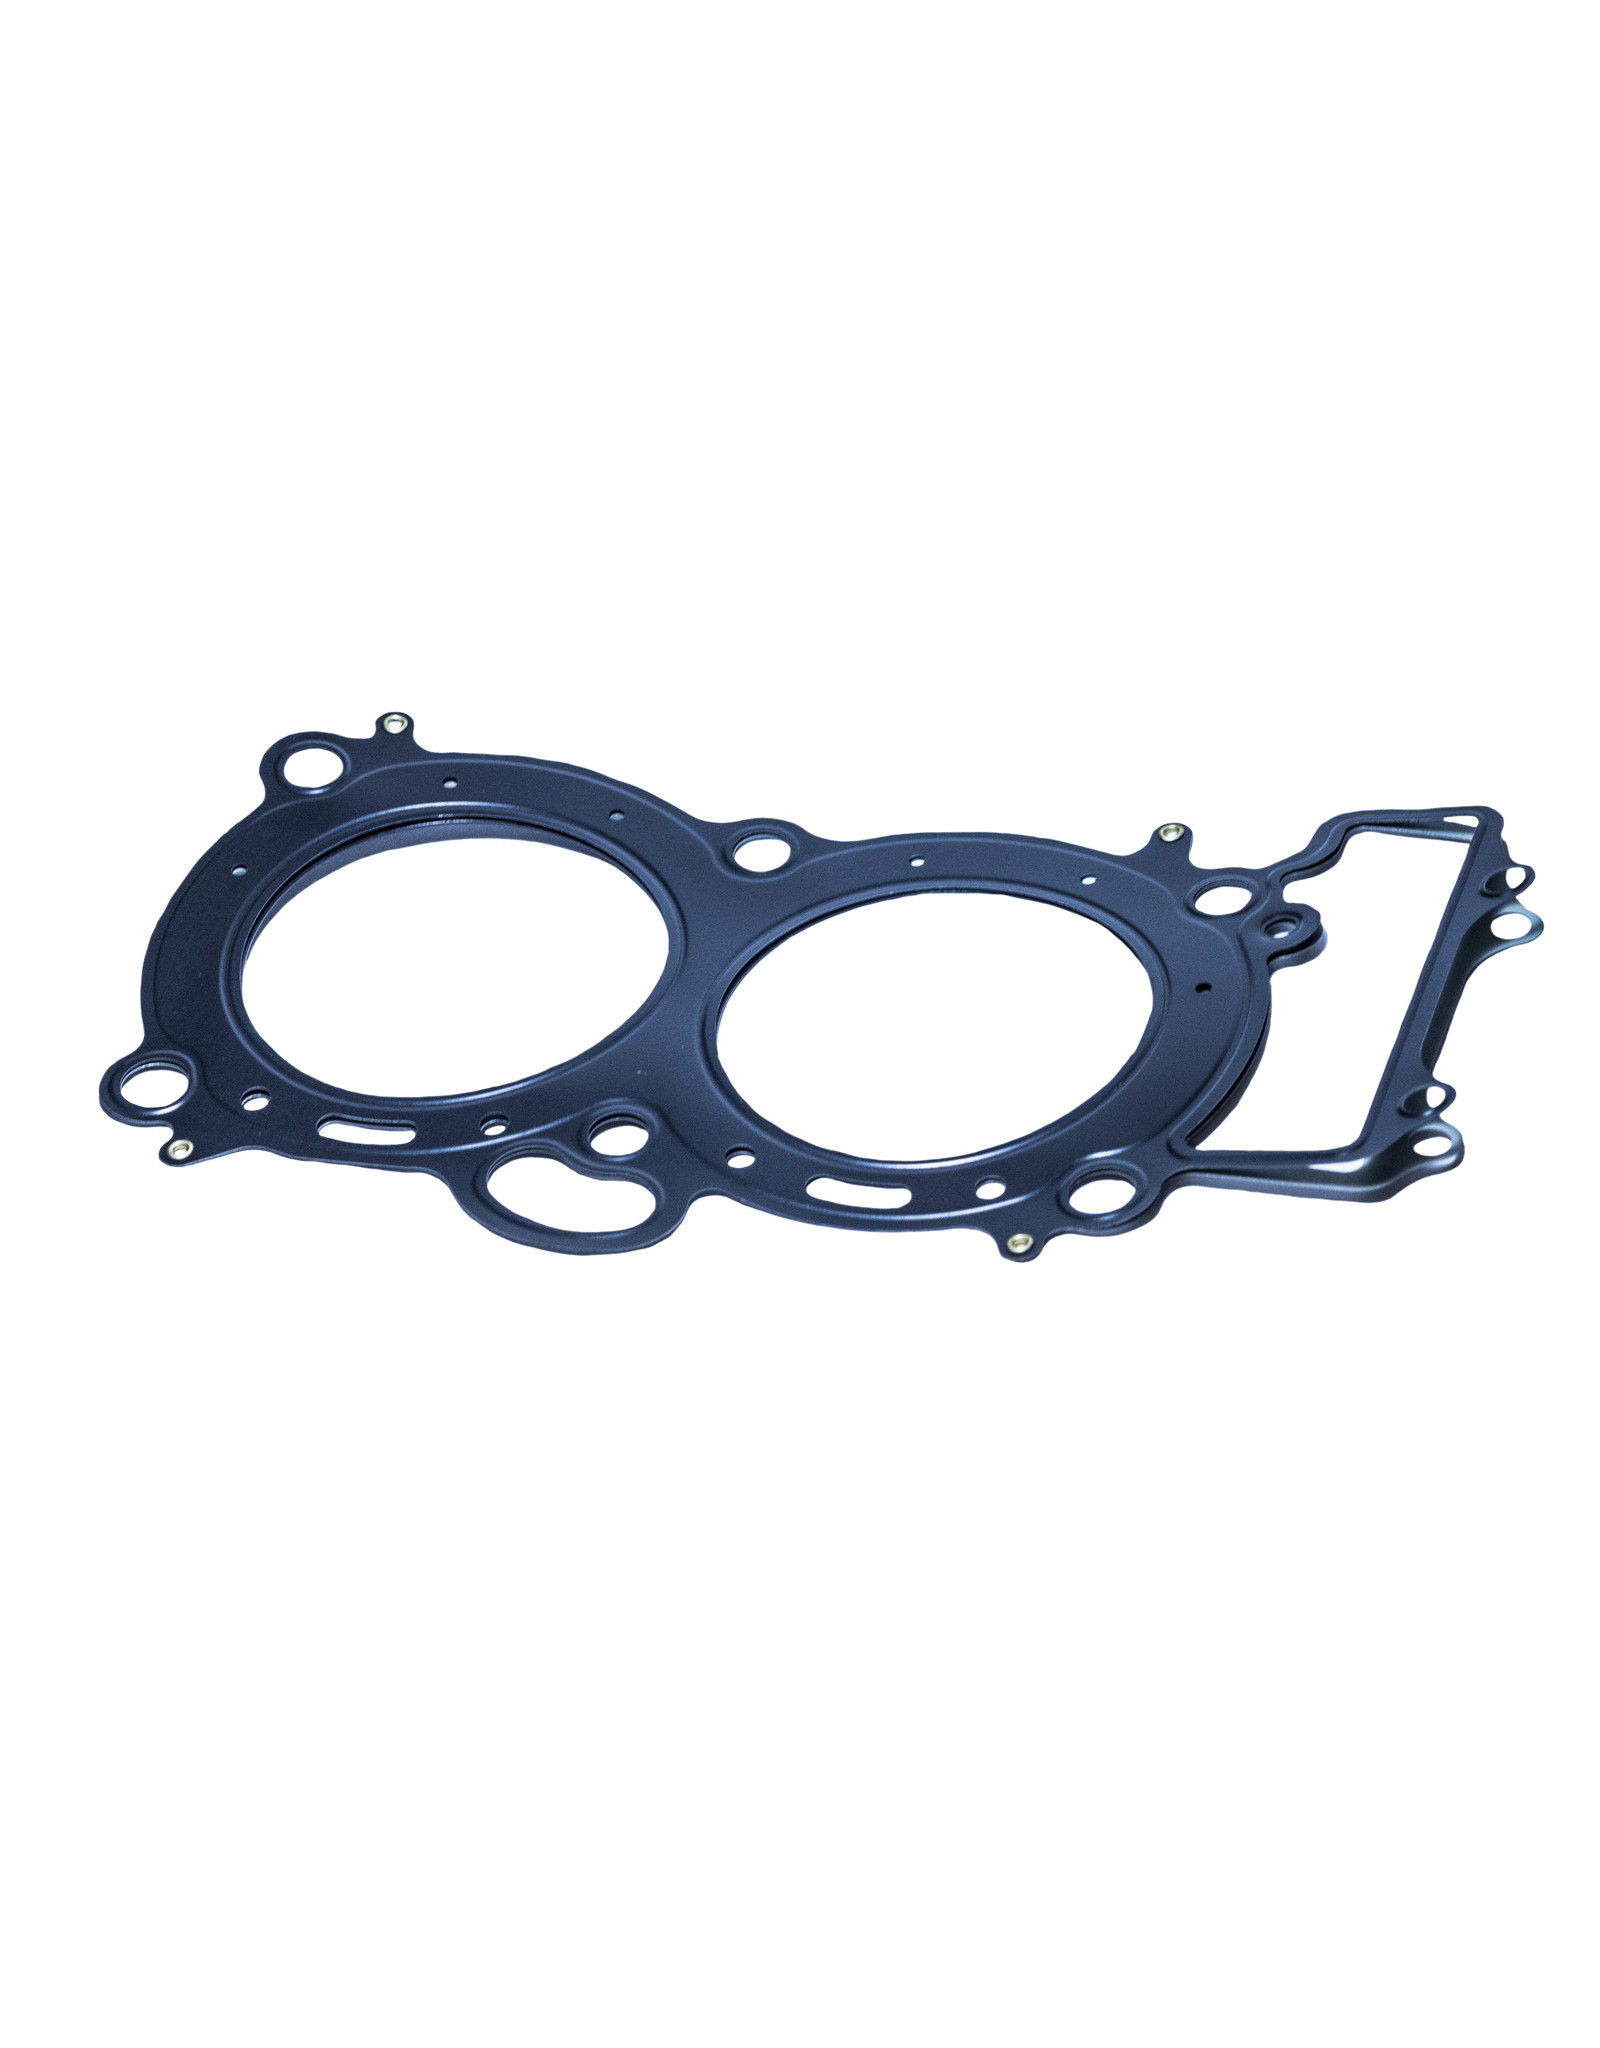 Head Gasket part number 857445 for RSV4 09-14 and Tuono V4 09-14